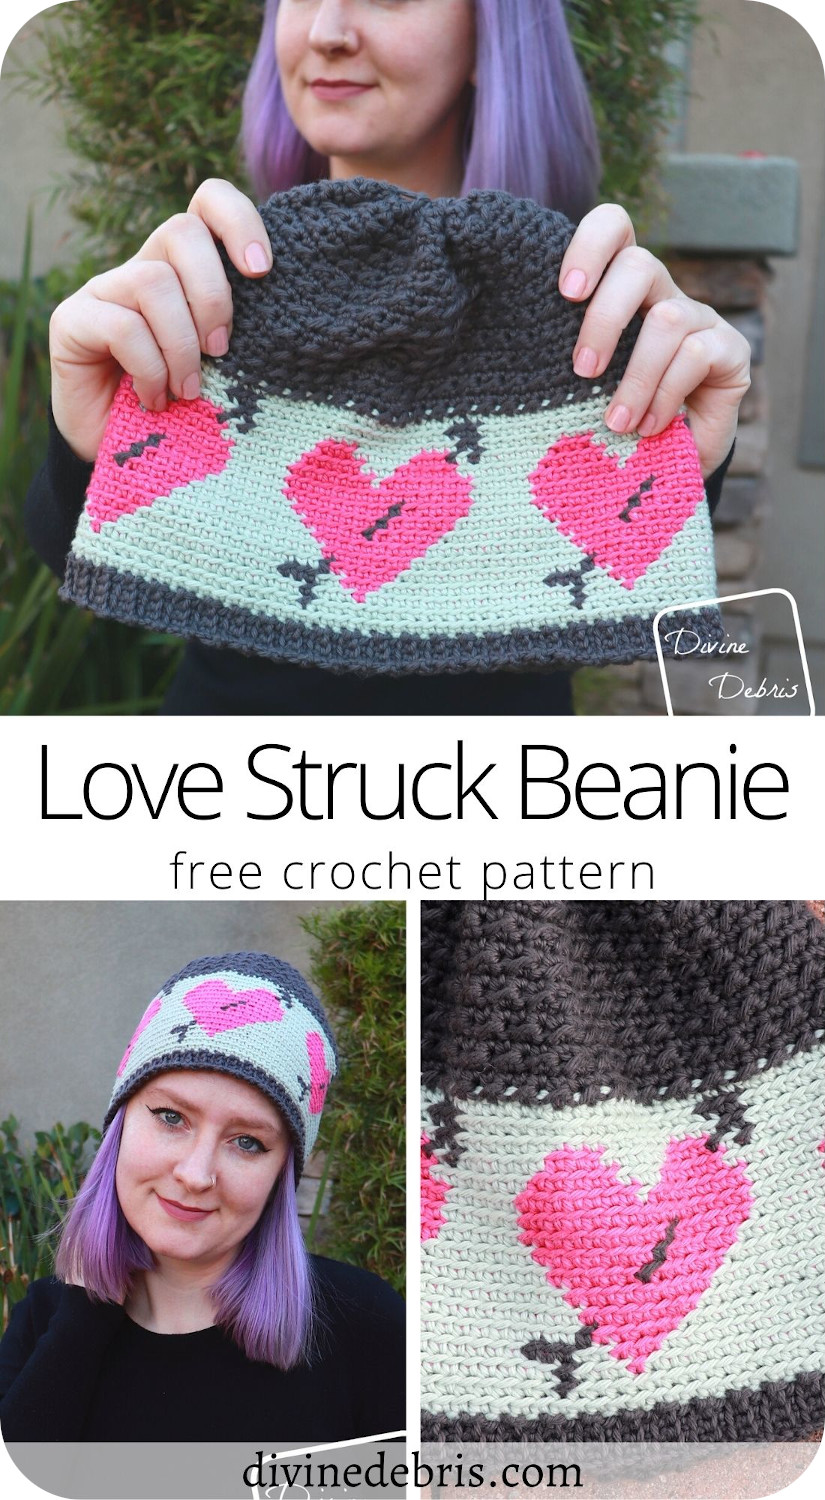 Learn to make the Love Struck Beanie, a fun combination of tapestry and traditional crochet techniques, from a free crochet pattern on DivineDebris.com